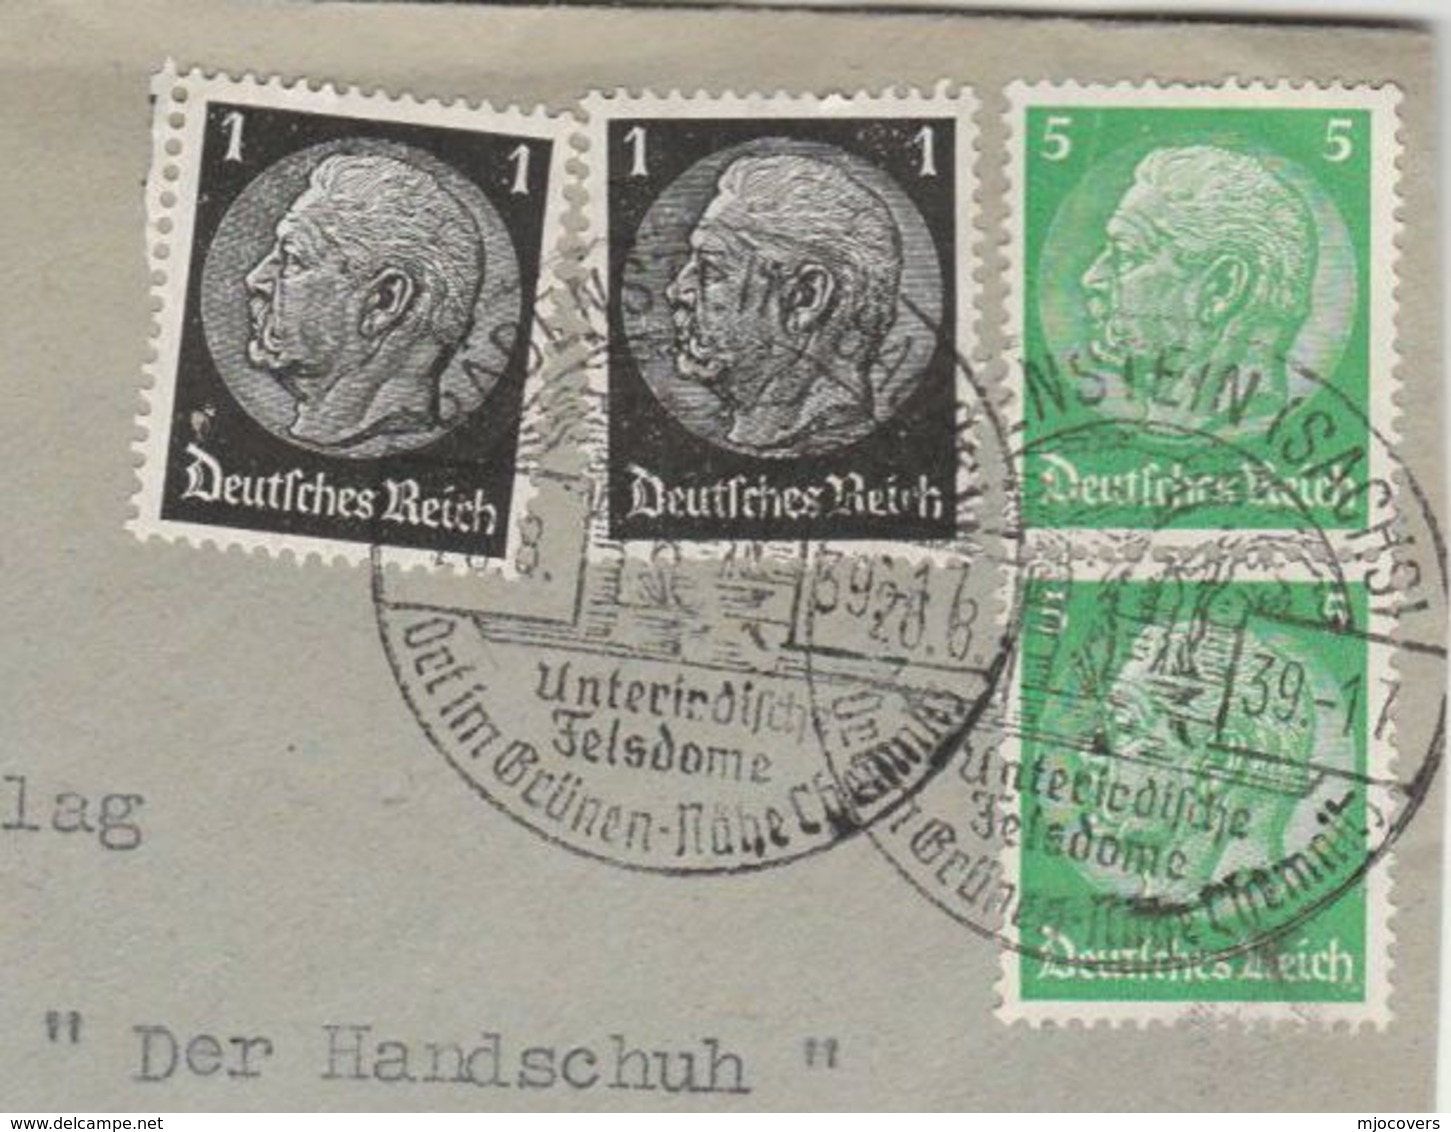 1939 Cover RABENSTEIN Unterirdisch Felsdome GERMANY Stamps - Covers & Documents